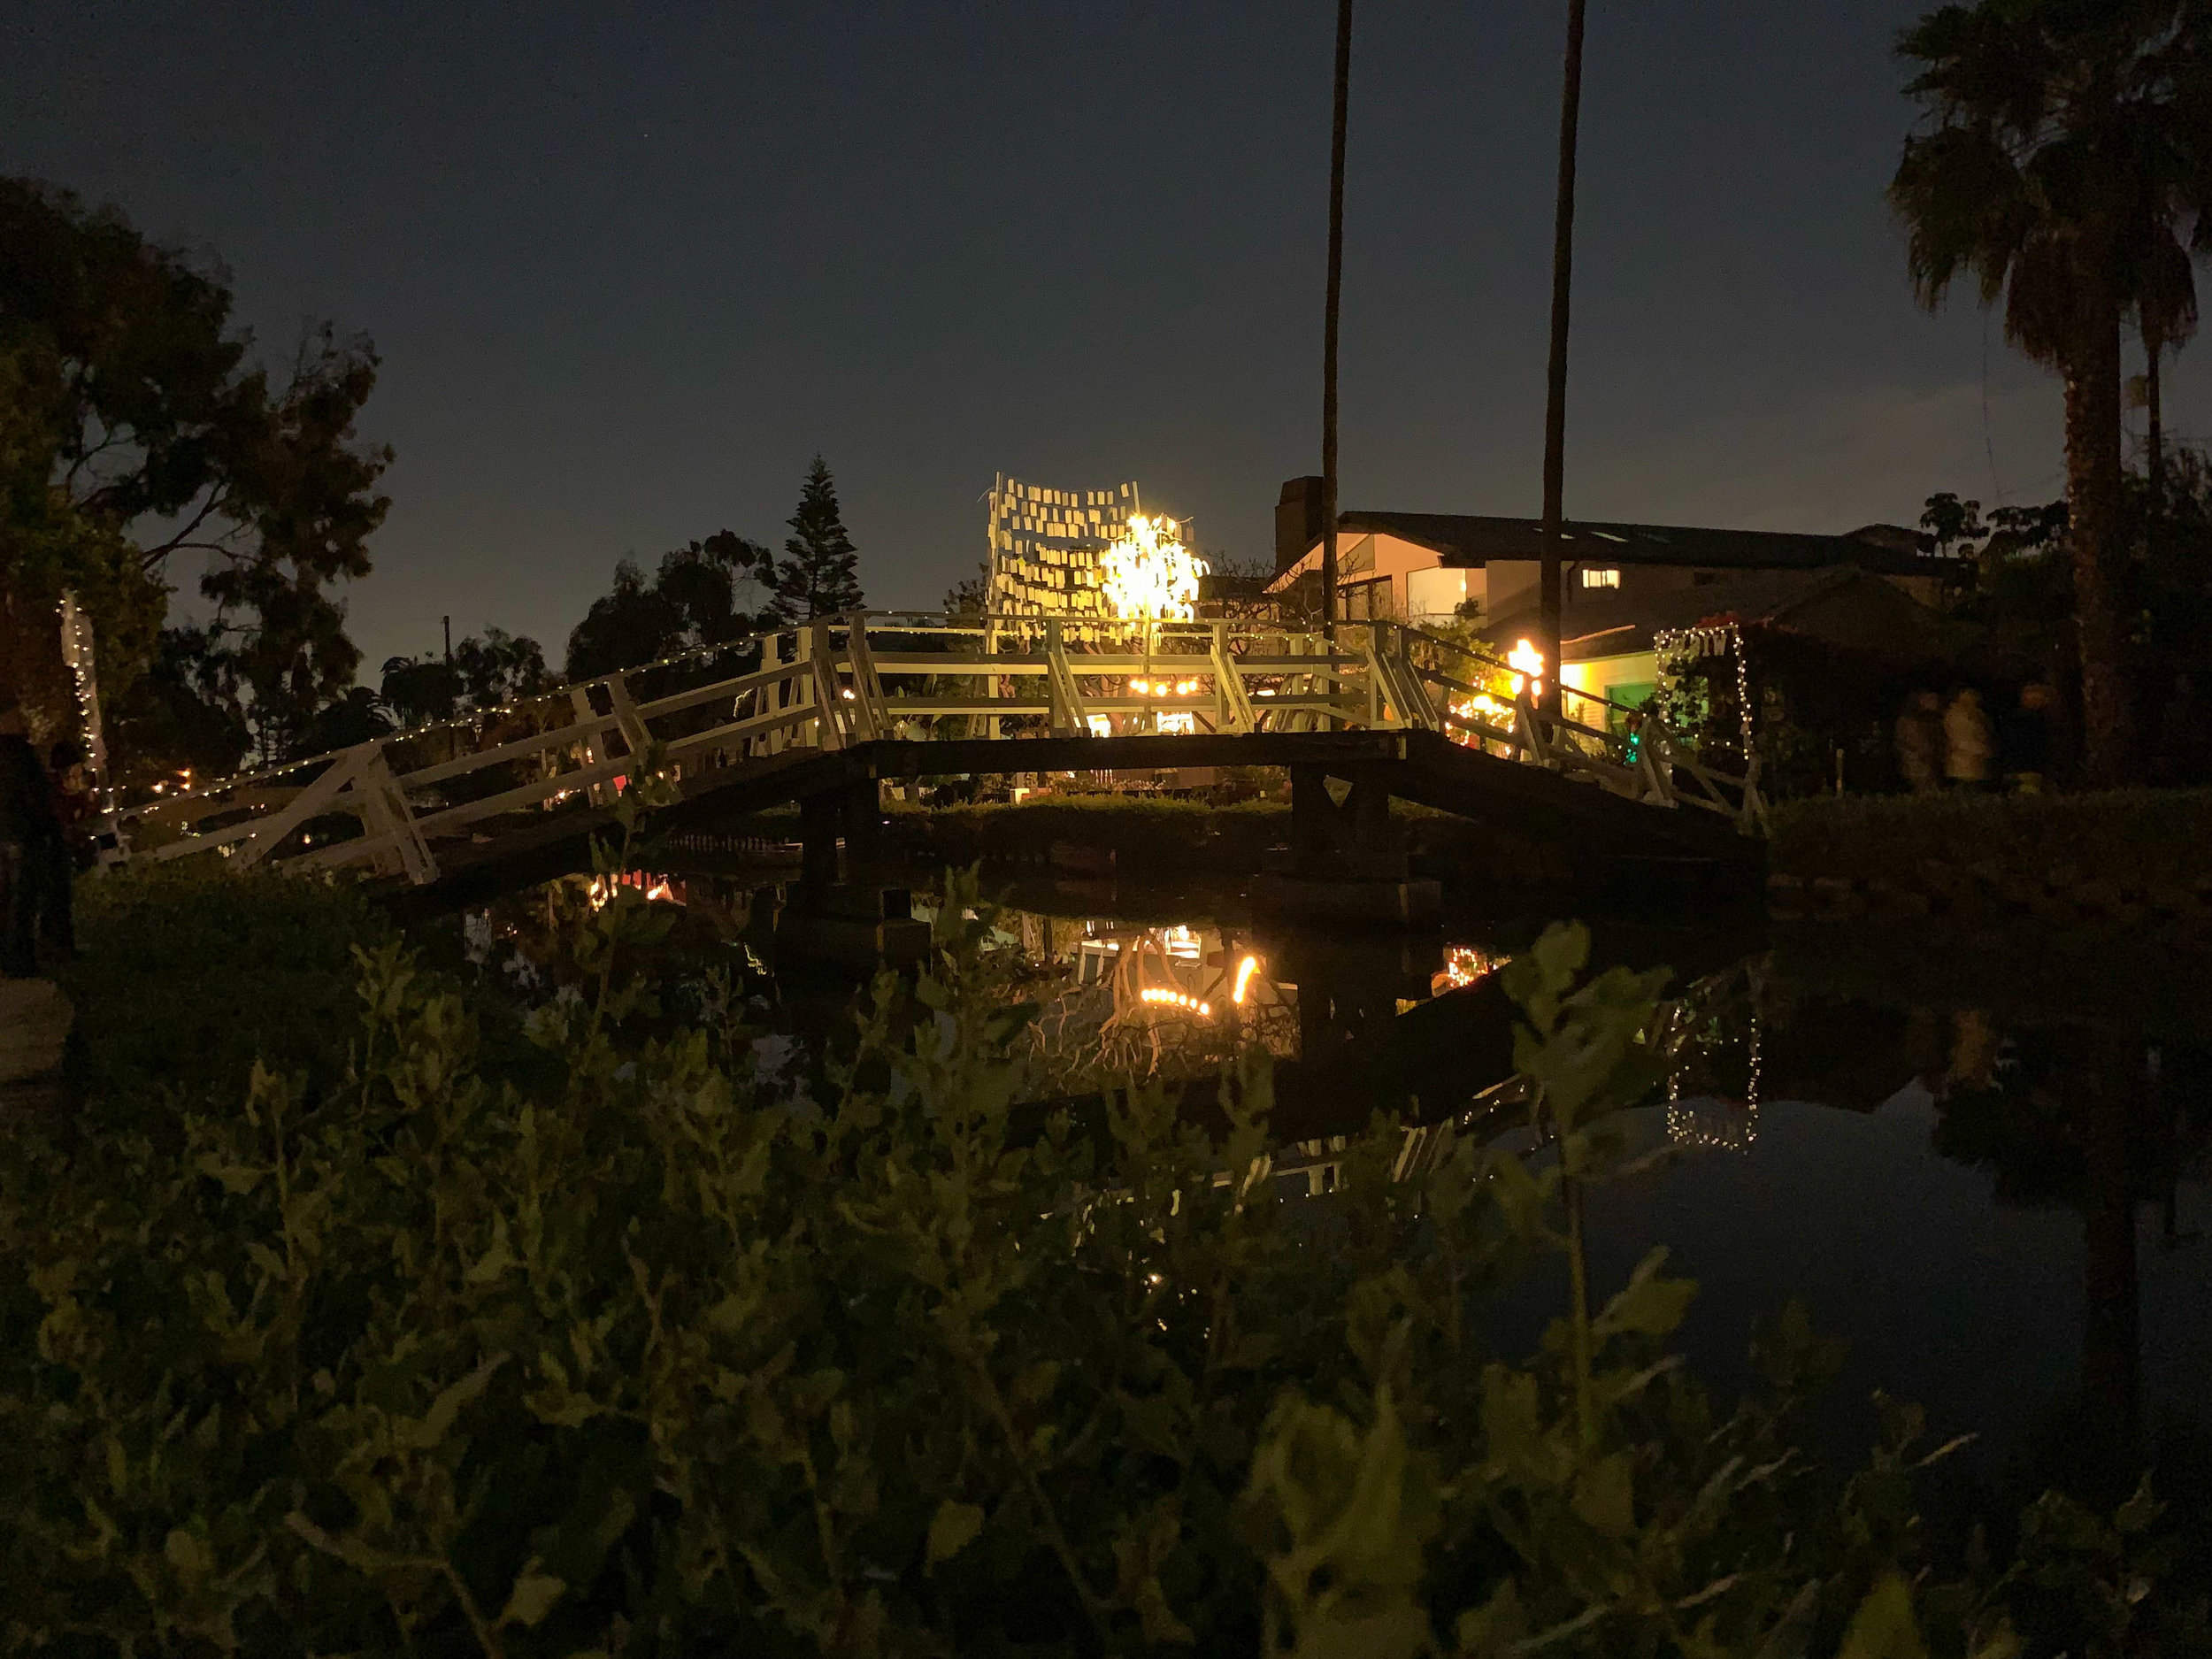 Christmas Lights in Los Angeles Venice Canals - Bridge Decorations Wish